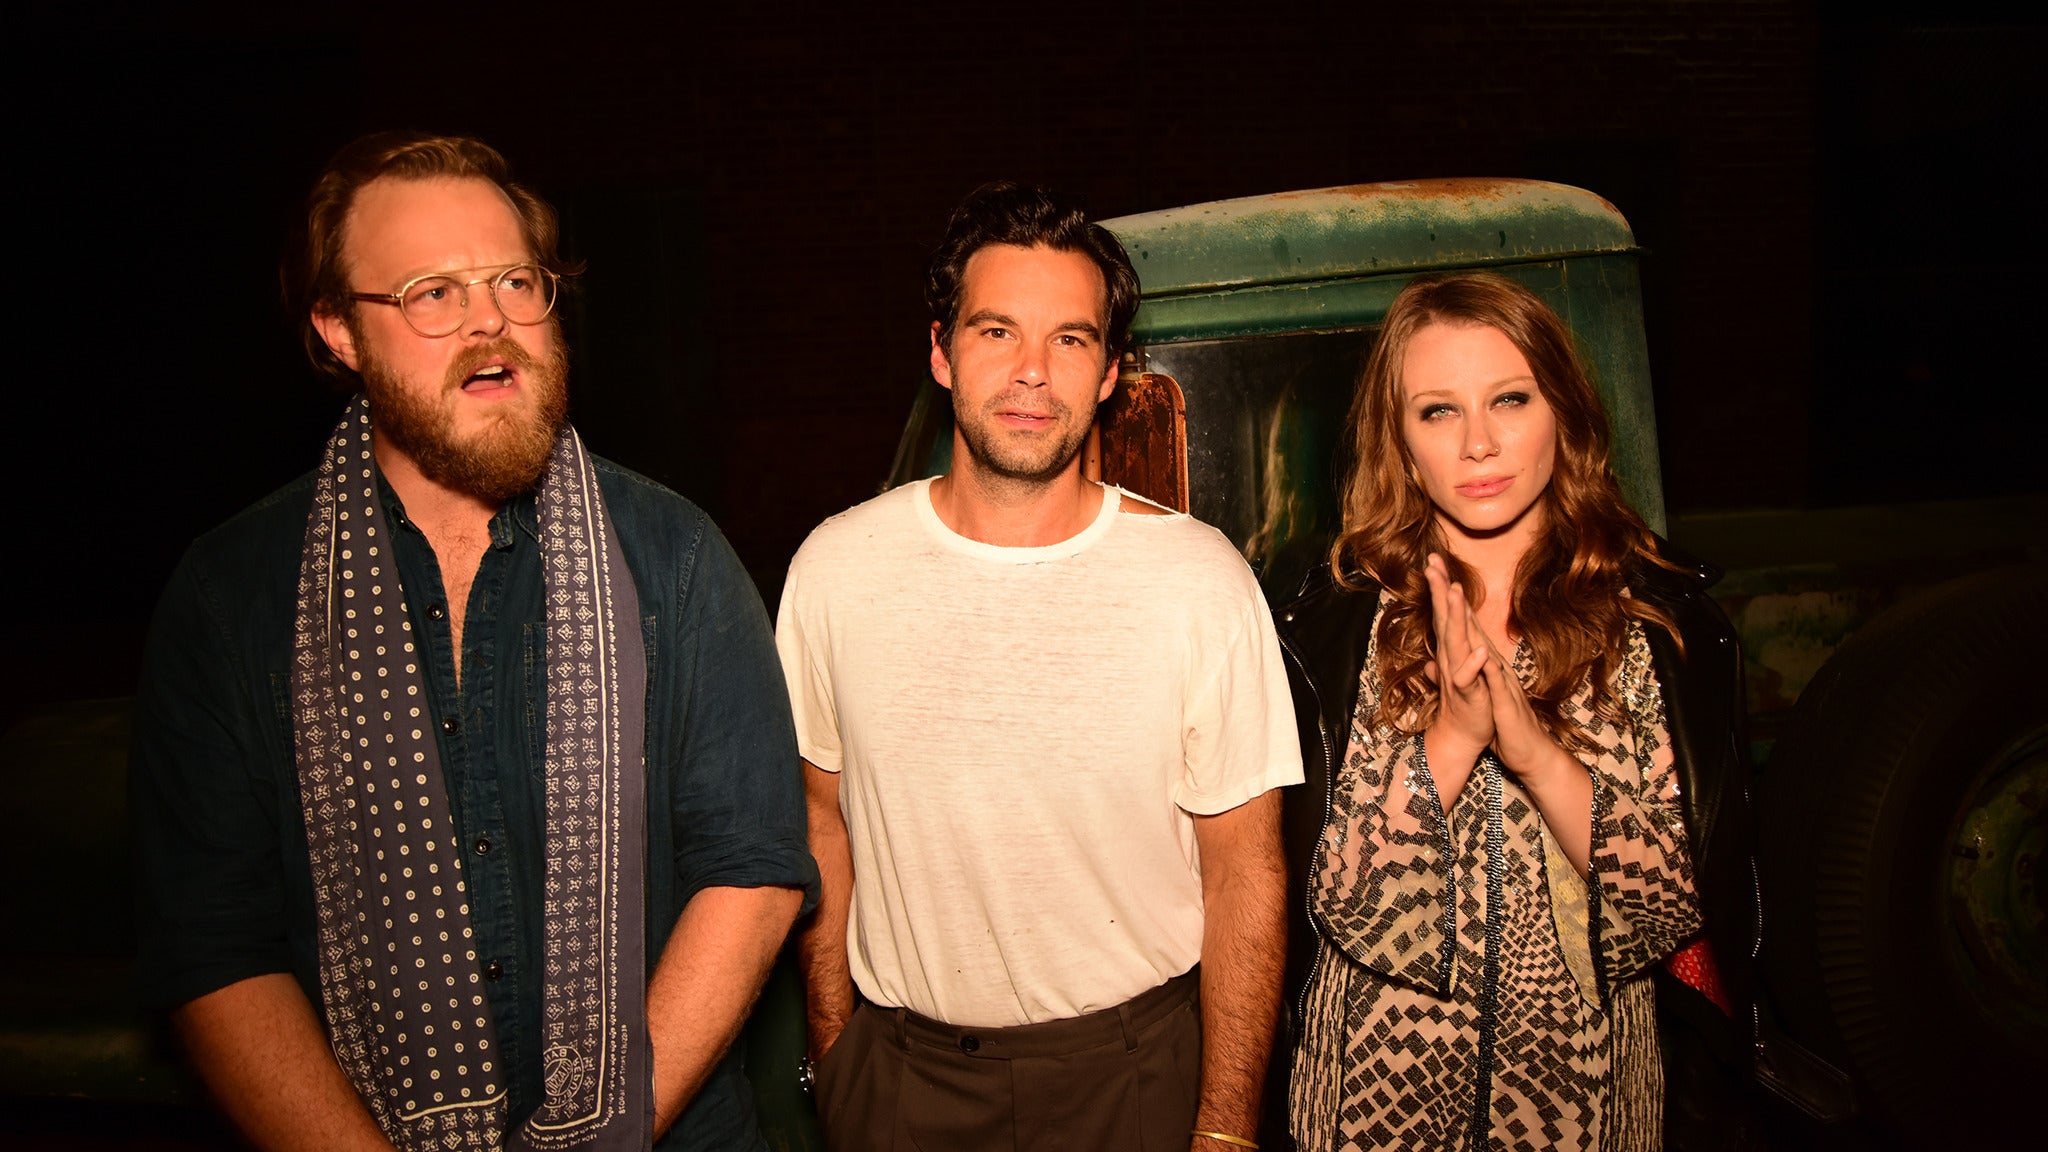 The Lone Bellow: Half Moon Light Tour in Seattle promo photo for Spotify presale offer code